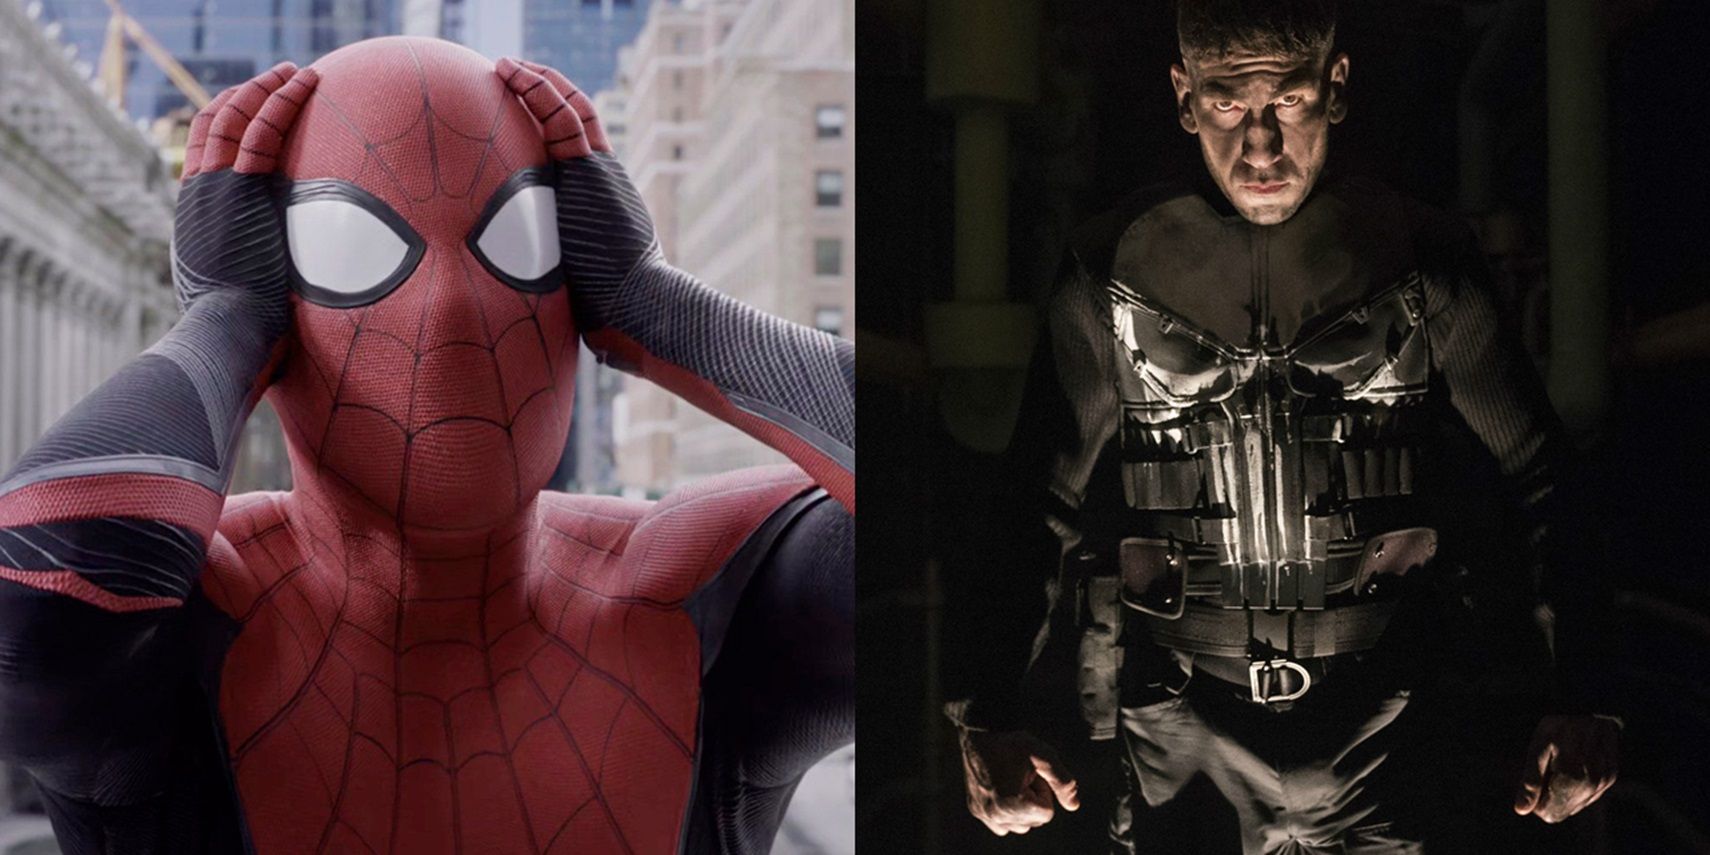 Tom Holland as Spider Man and Jon Bernthal as the Punisher